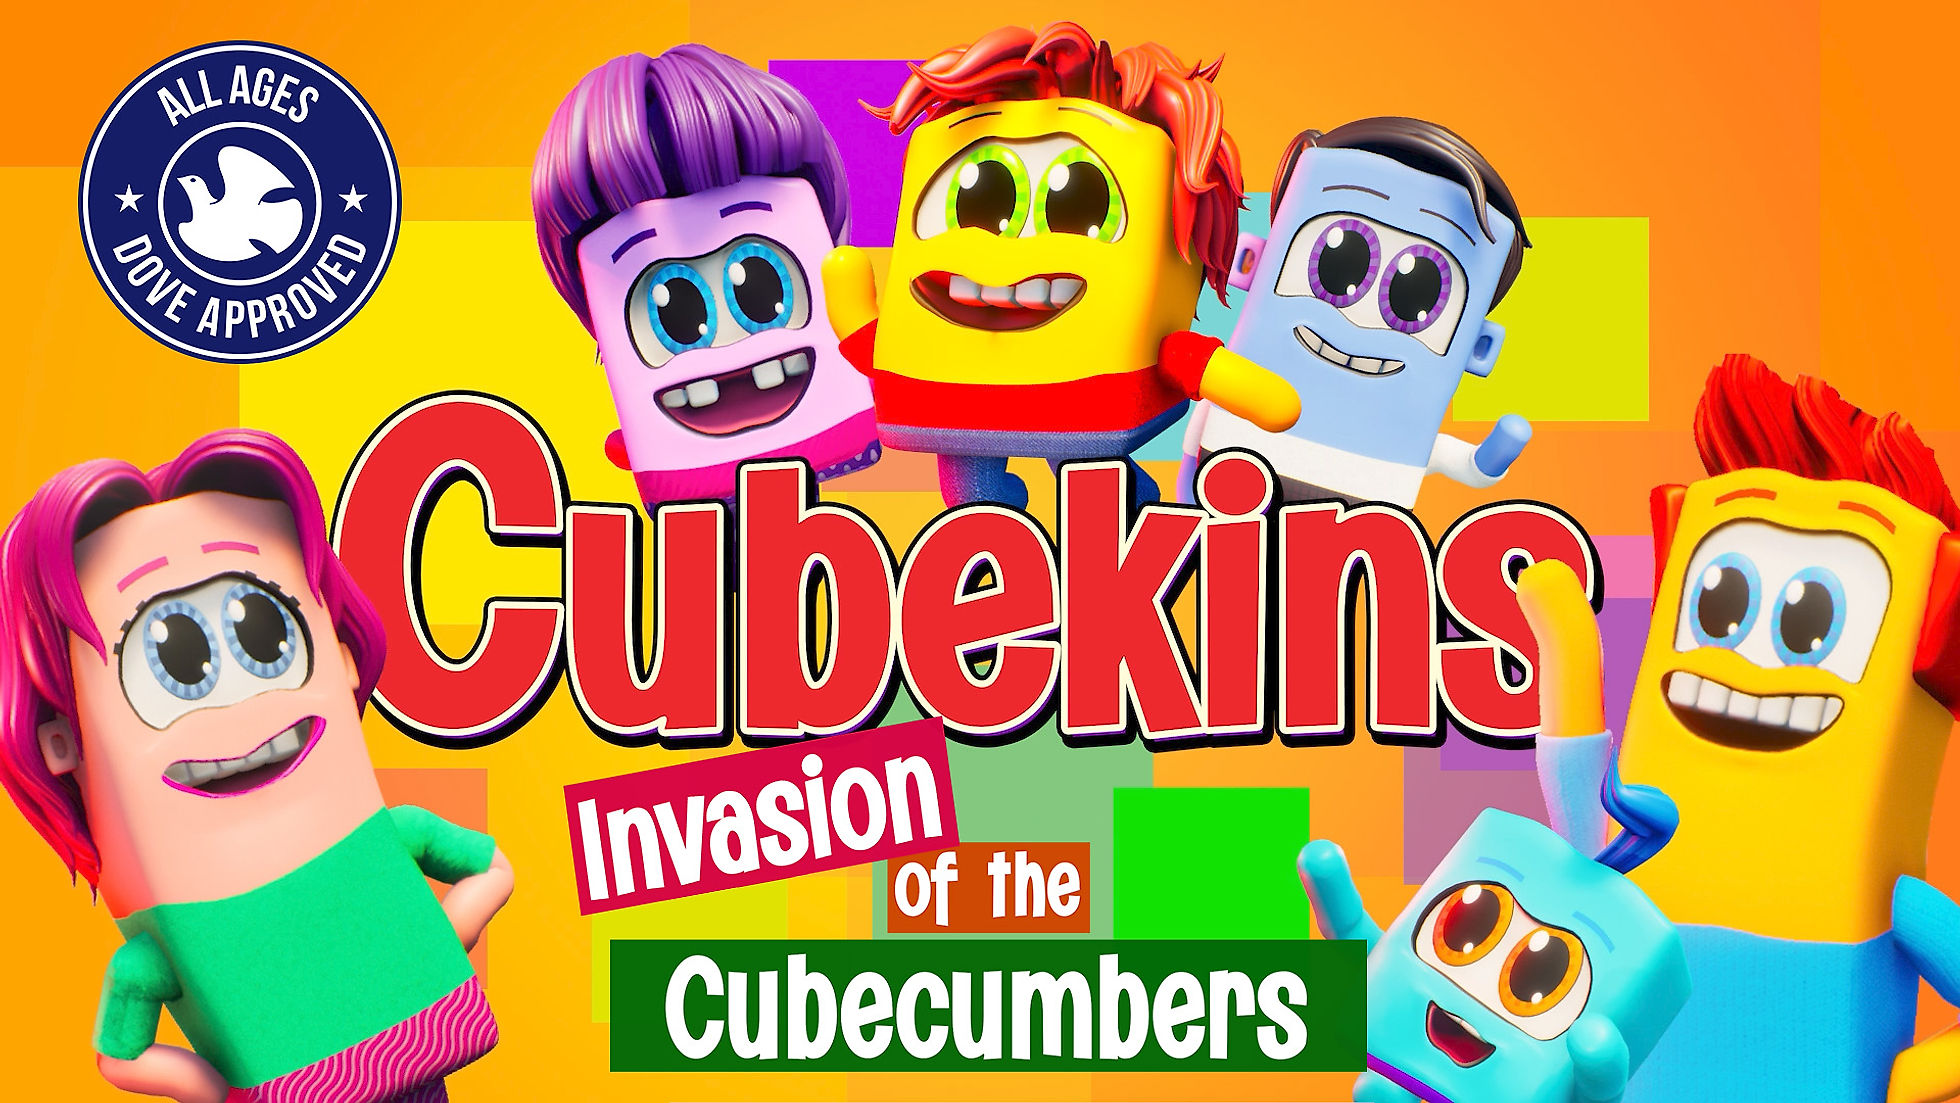 Cubekins Ep1 - Invasion of the Cubecumbers